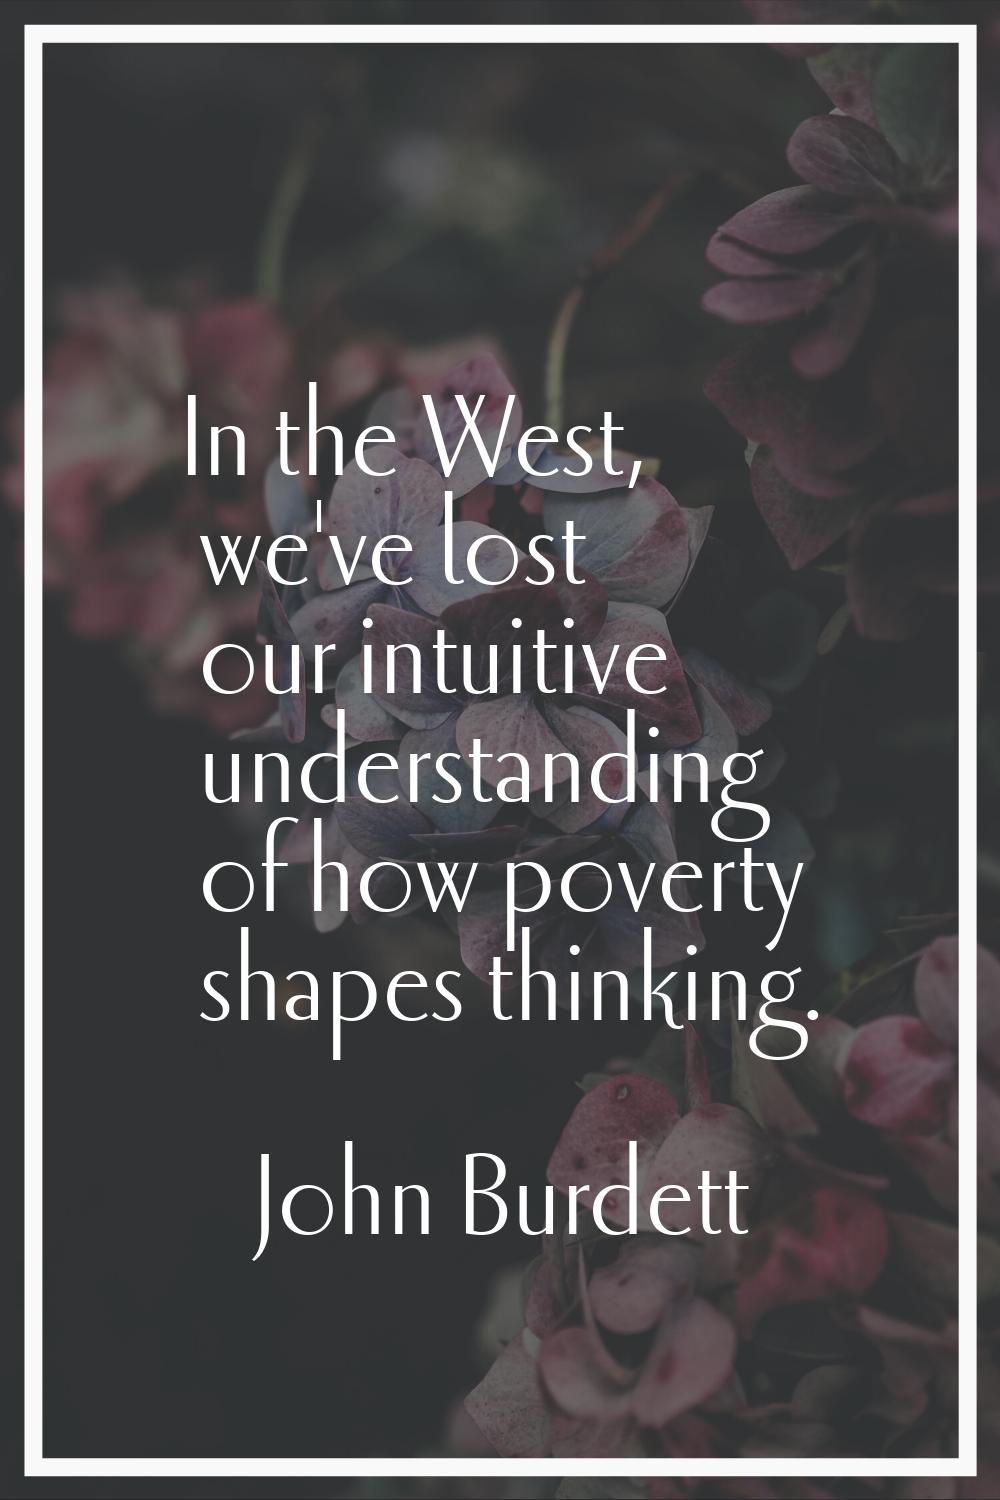 In the West, we've lost our intuitive understanding of how poverty shapes thinking.